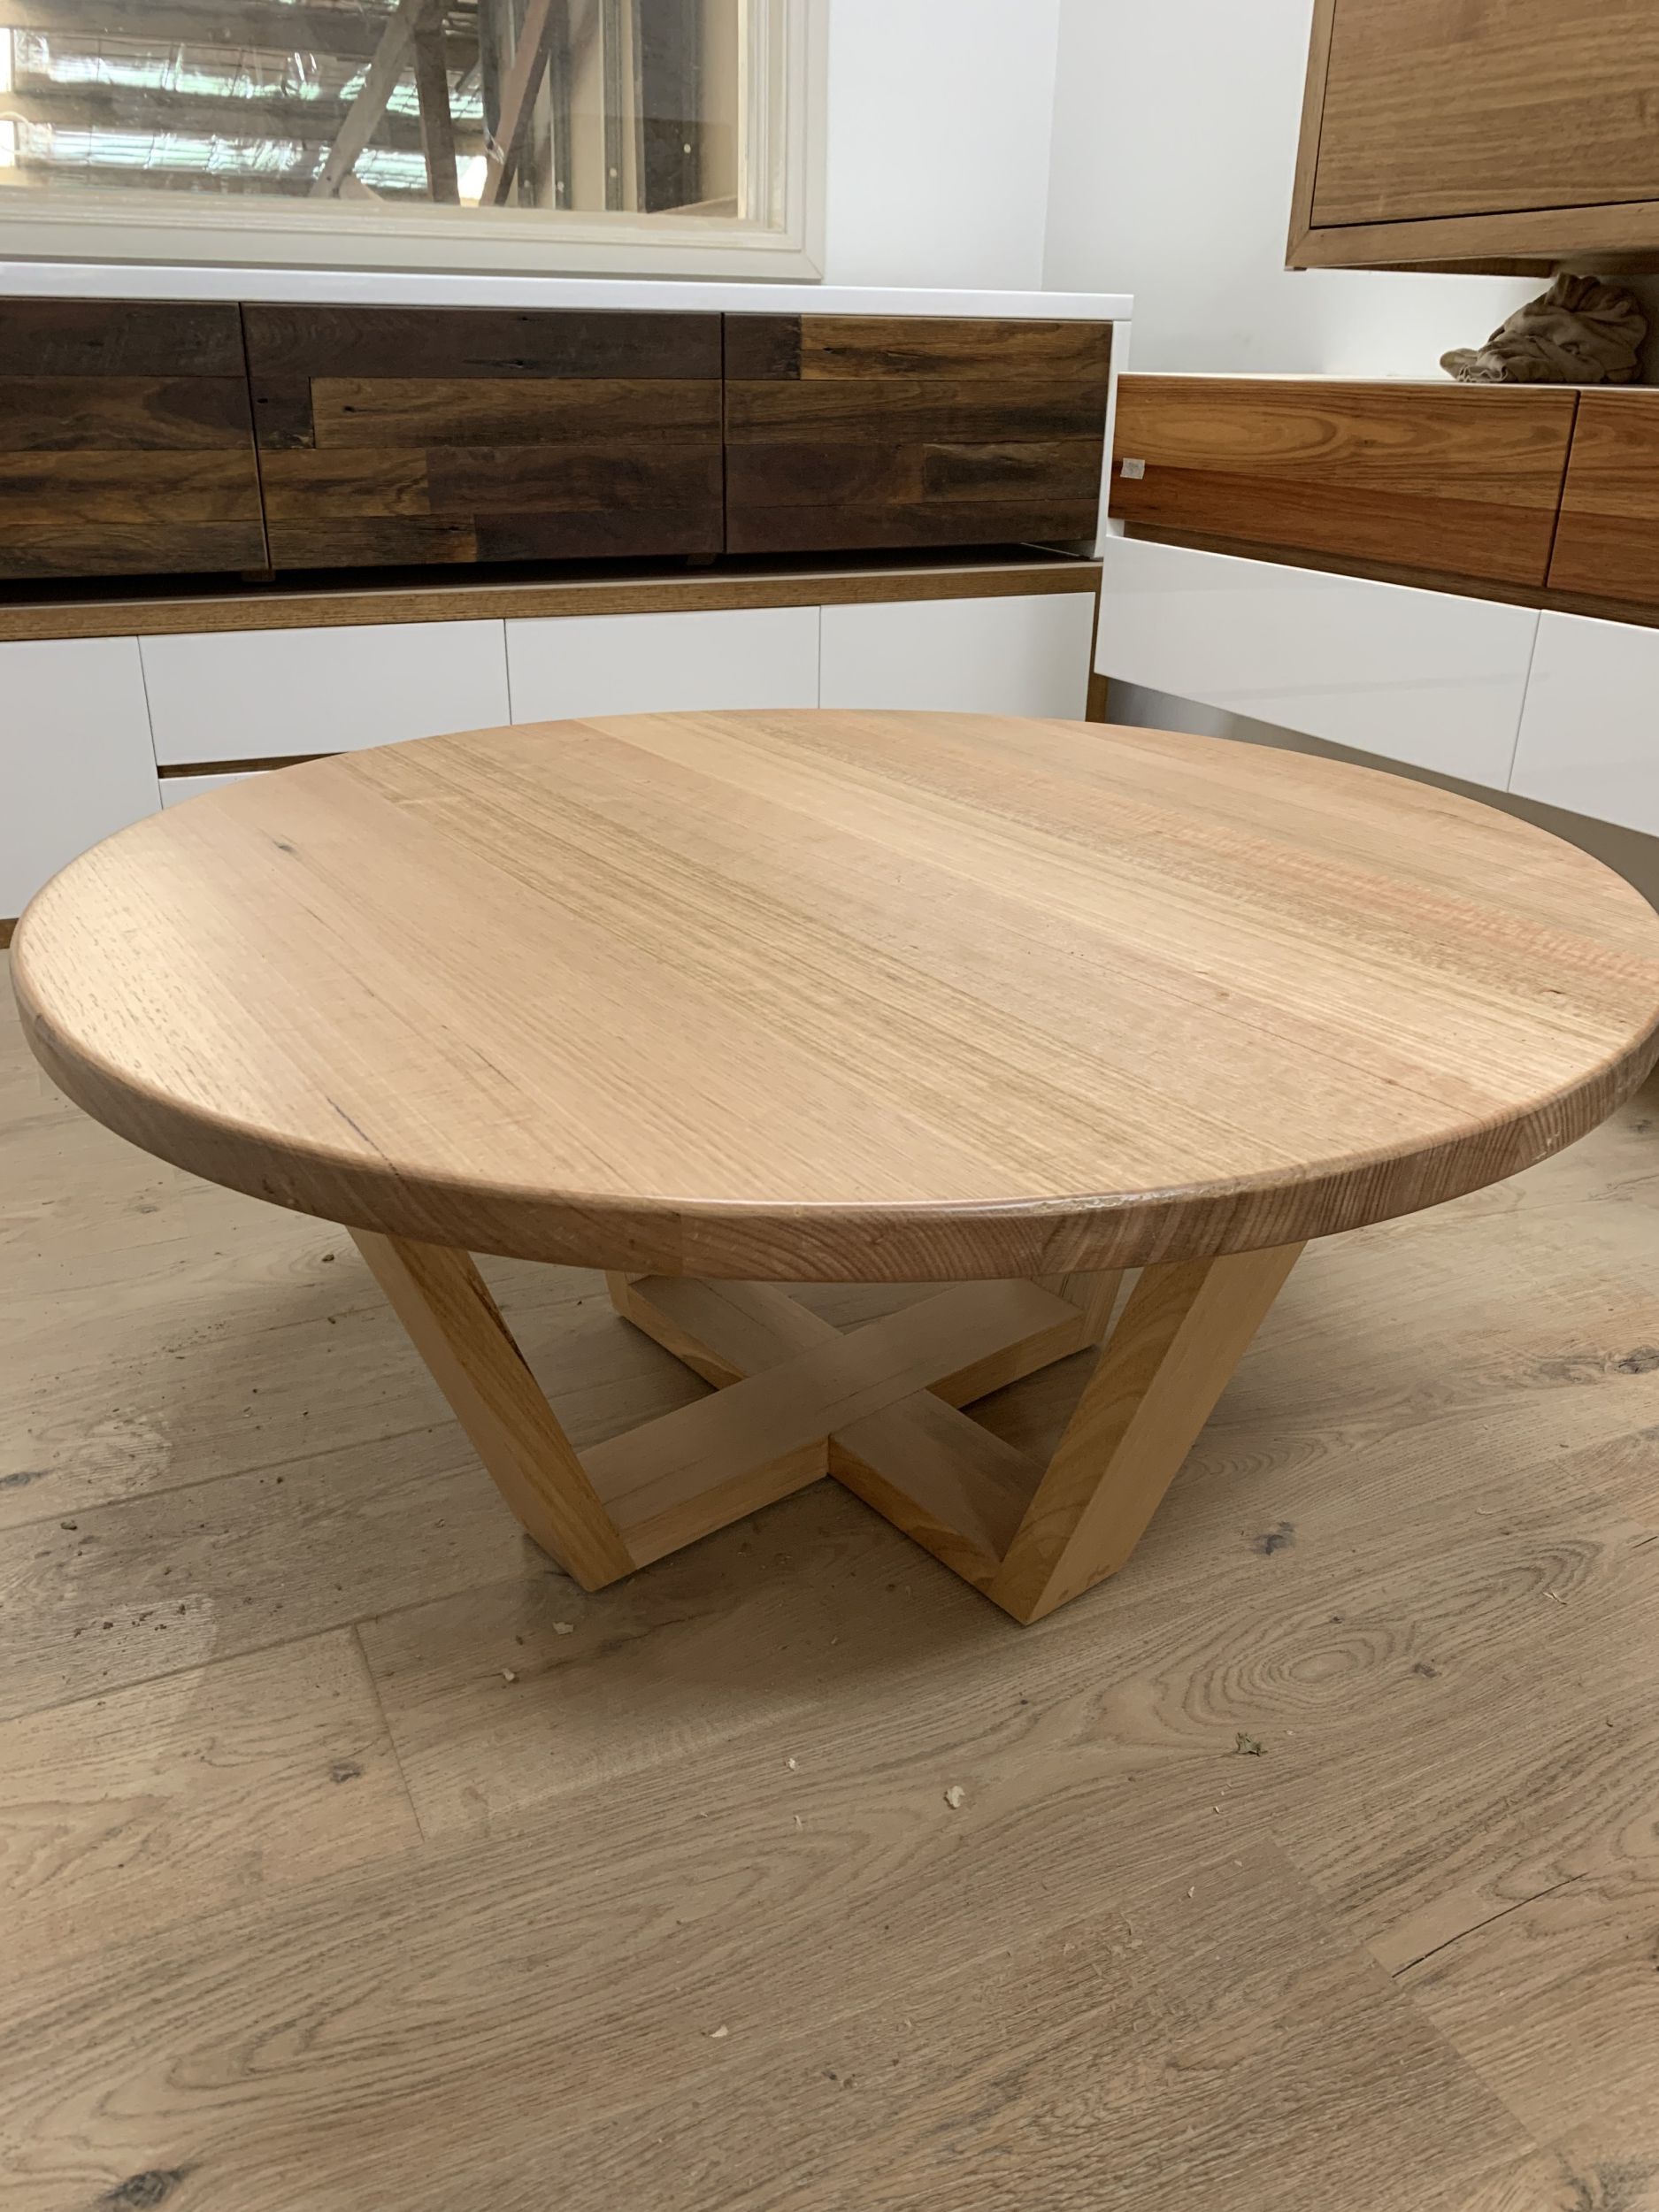 Tassie Oak Cross Round Coffee Table – Australian Made With 2020 Metal Legs And Oak Top Round Coffee Tables (View 5 of 20)